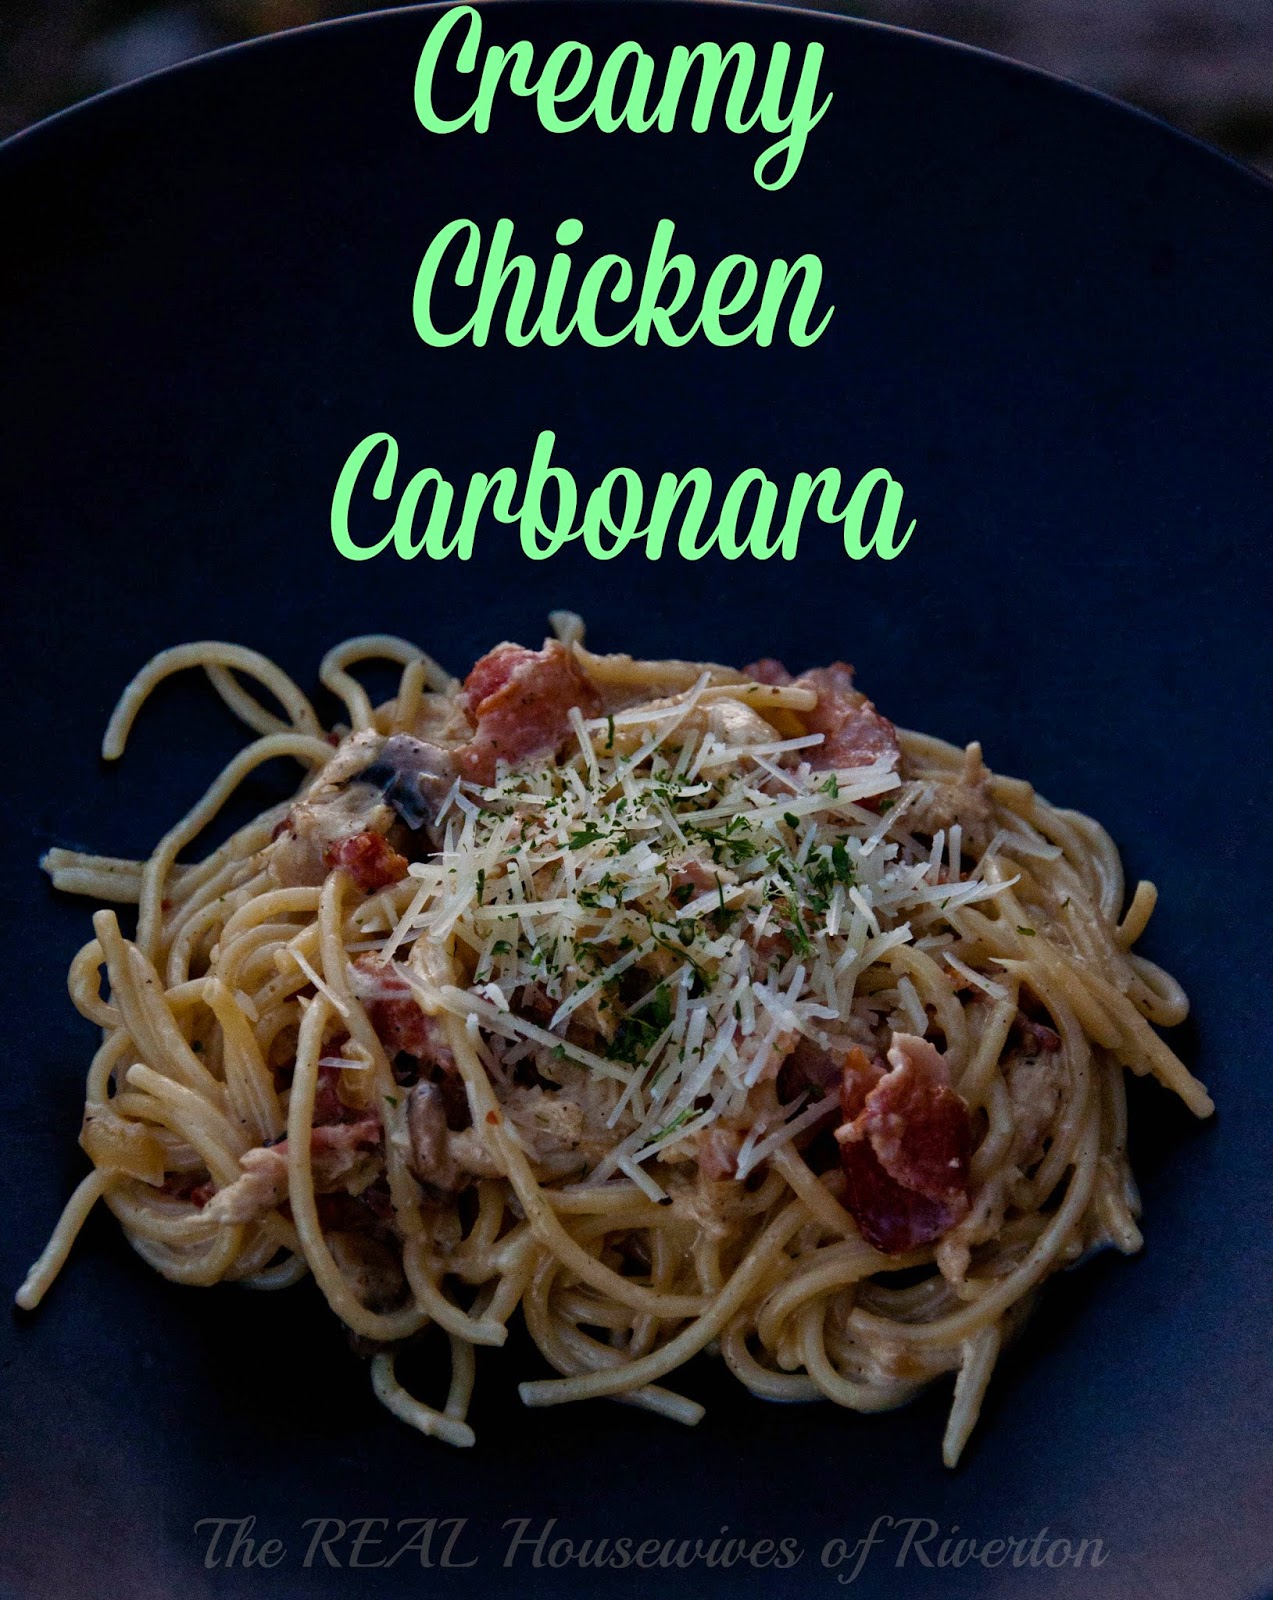 Creamy Chicken Carbonara with Bacon - Housewives of Riverton